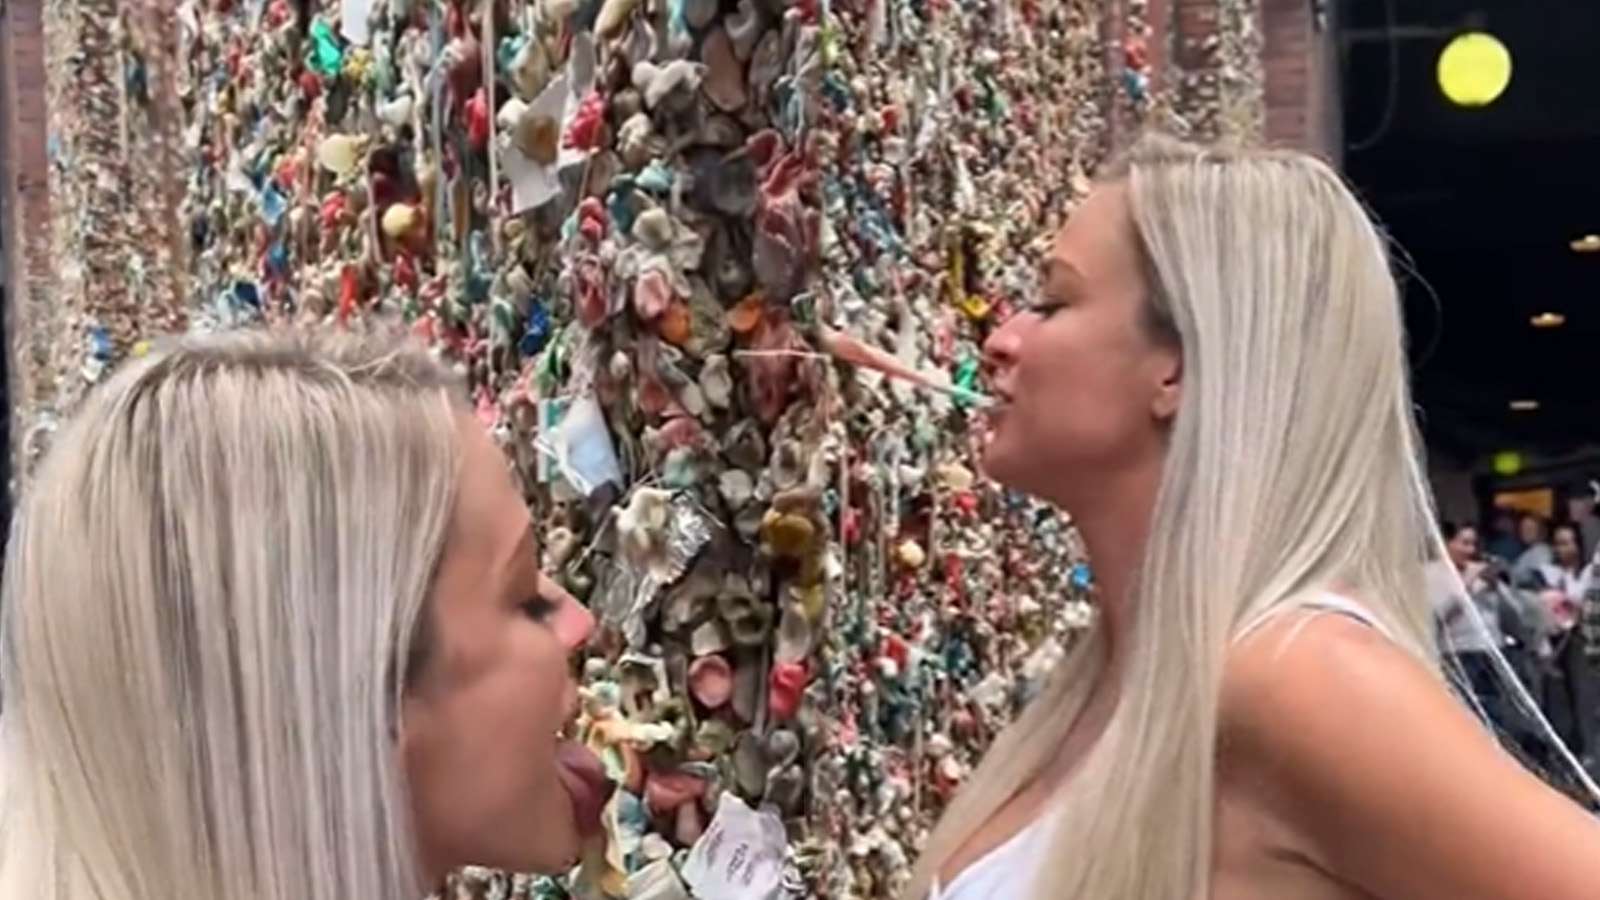 Twitch streamer xoAeriel goes viral for licking Seattle gum wall